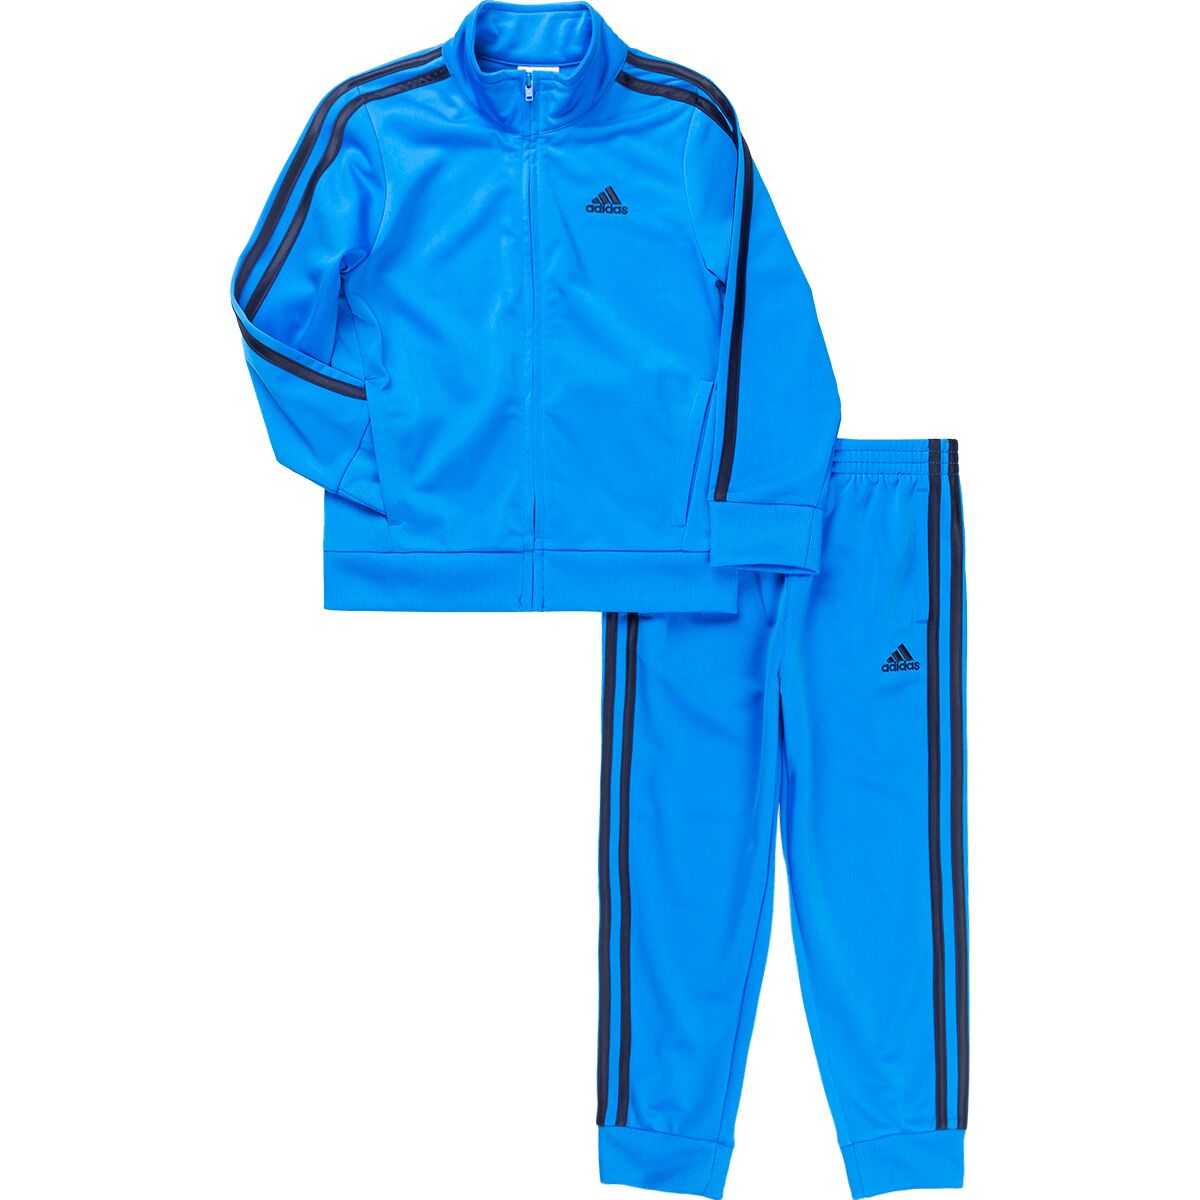 Adidas Classic Tricot Track Set - Toddler Boys'